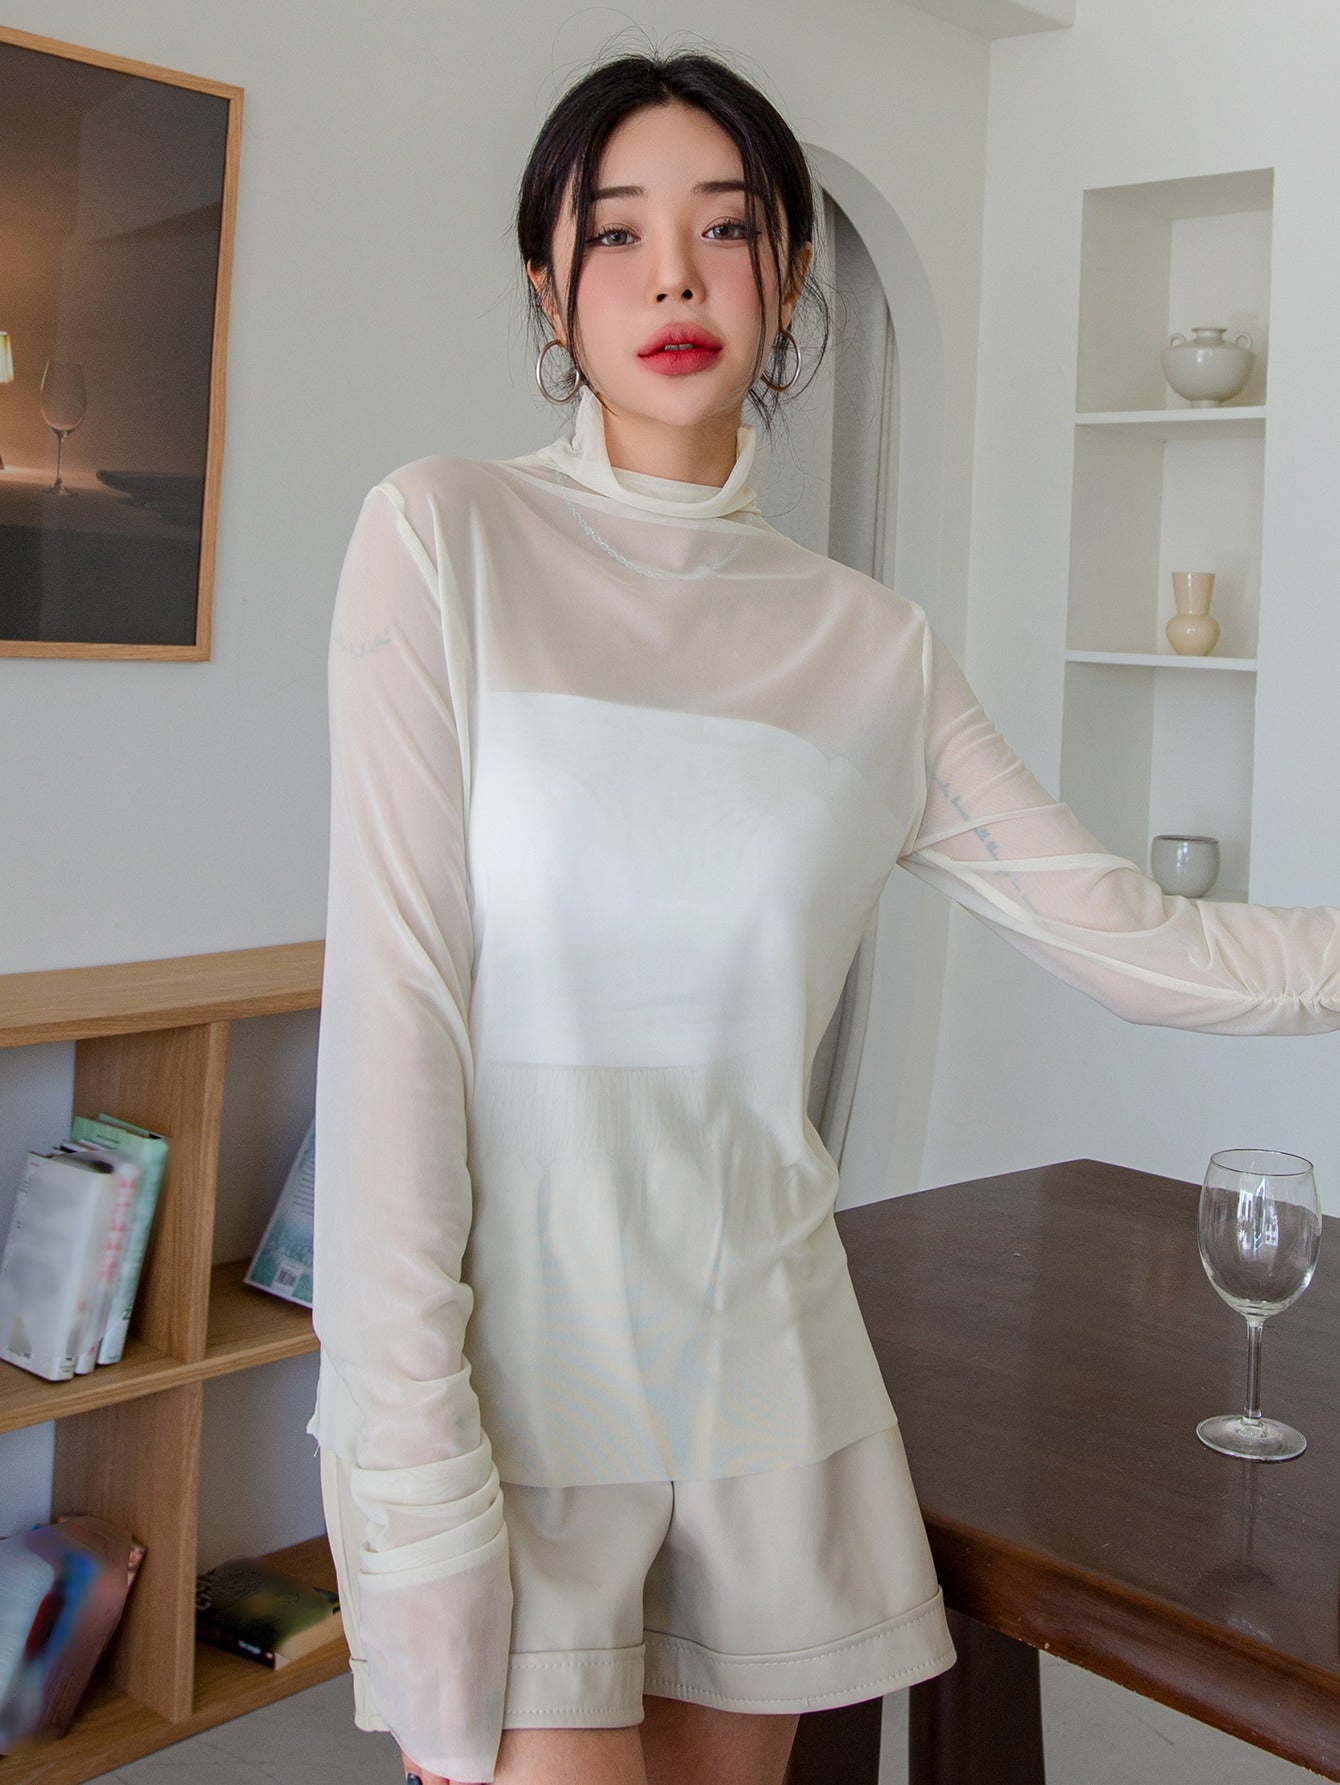 Cowl Neck Mesh Top Without Tube Top